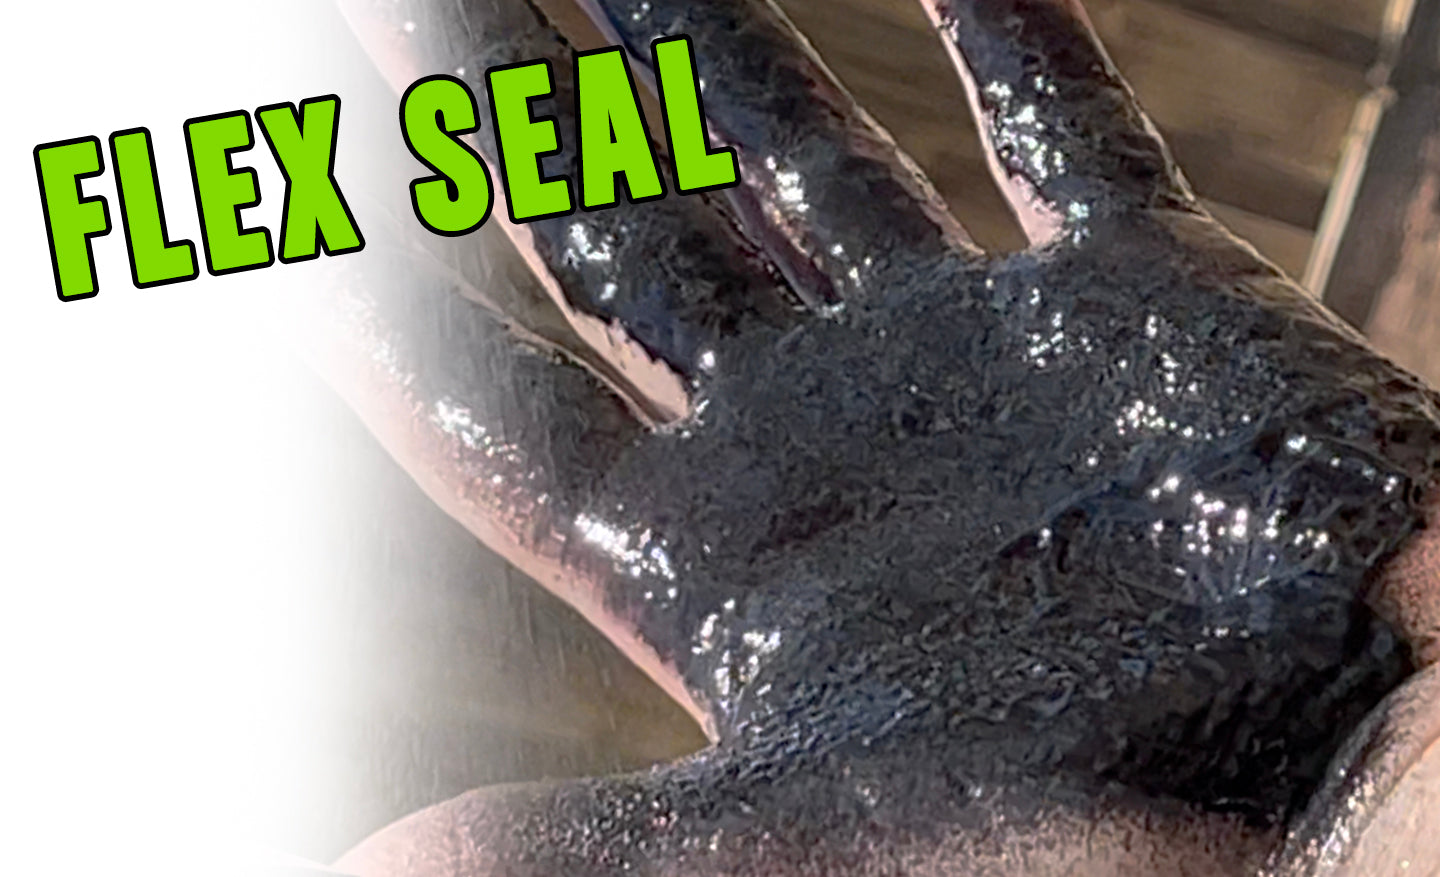 HOW TO REMOVE: Flex Seal